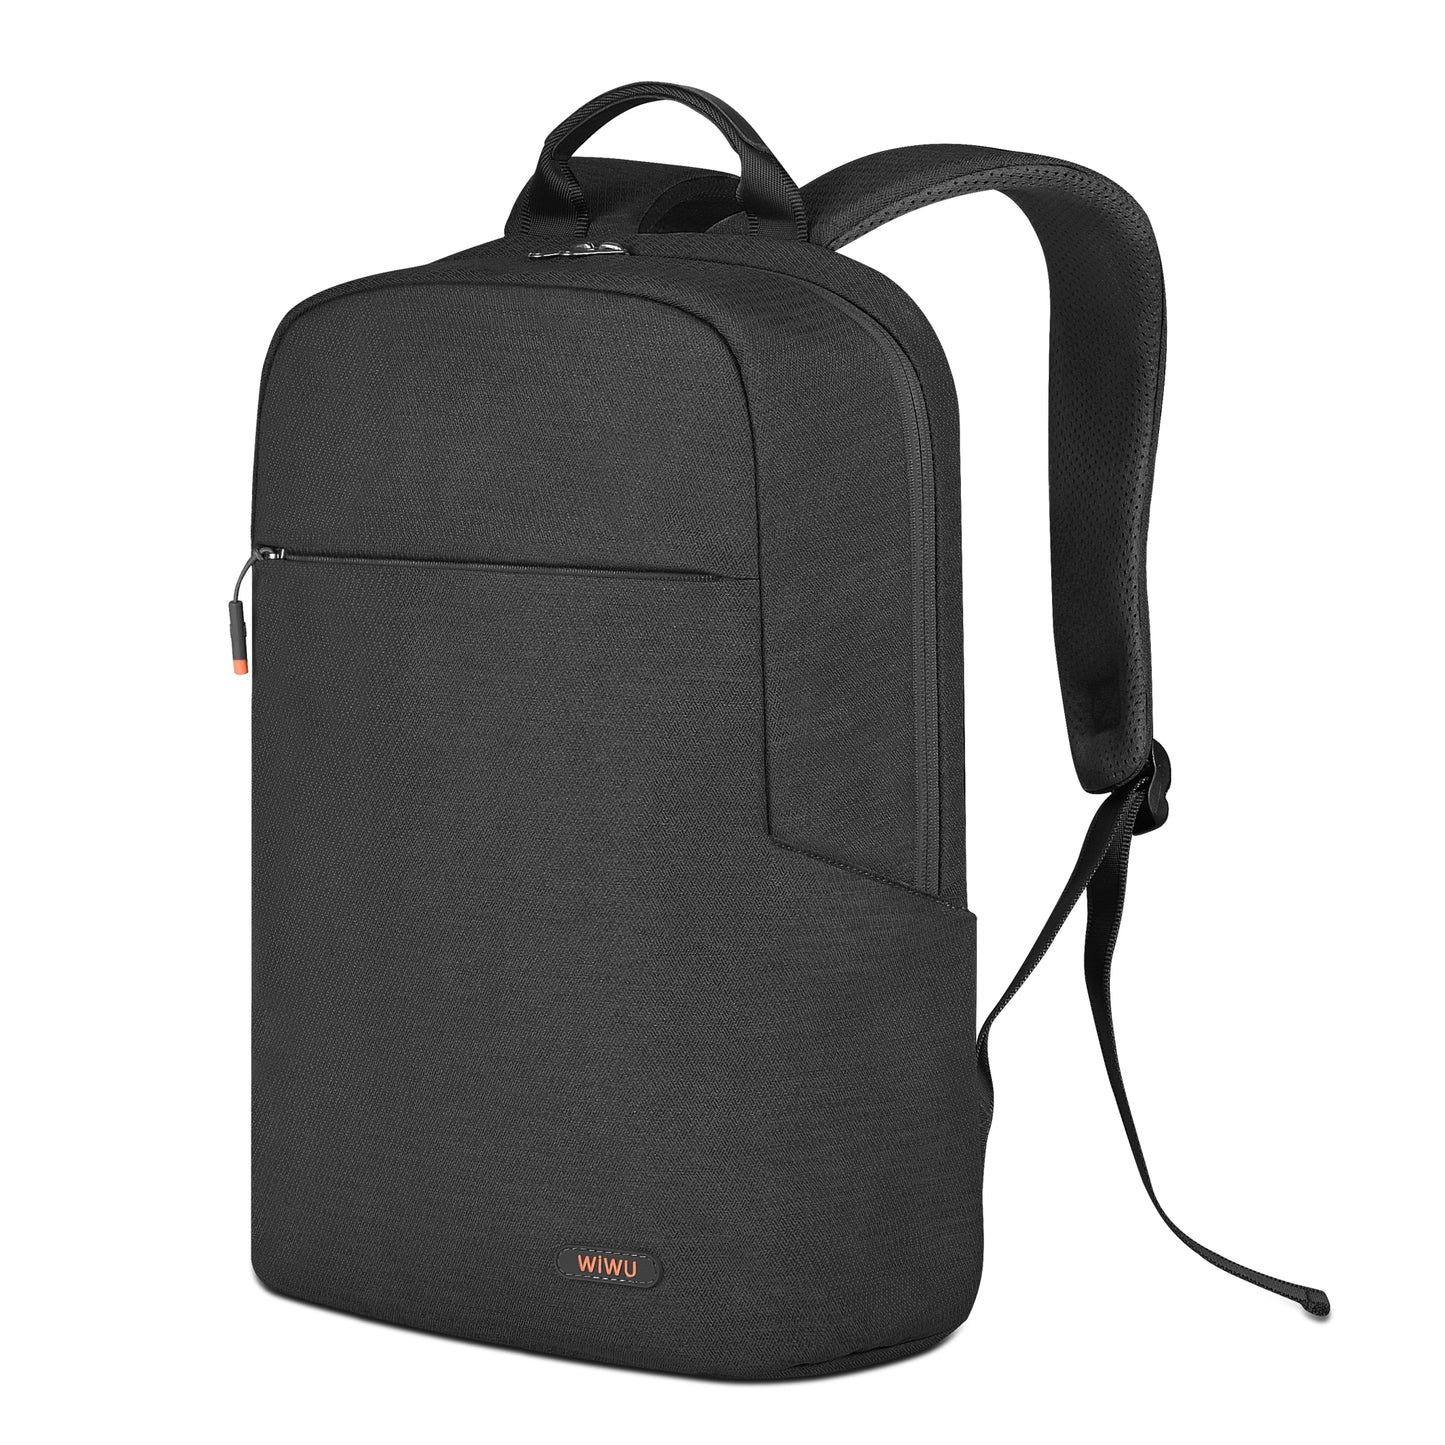 WiWu Pilot - Backpack for laptop and accessories